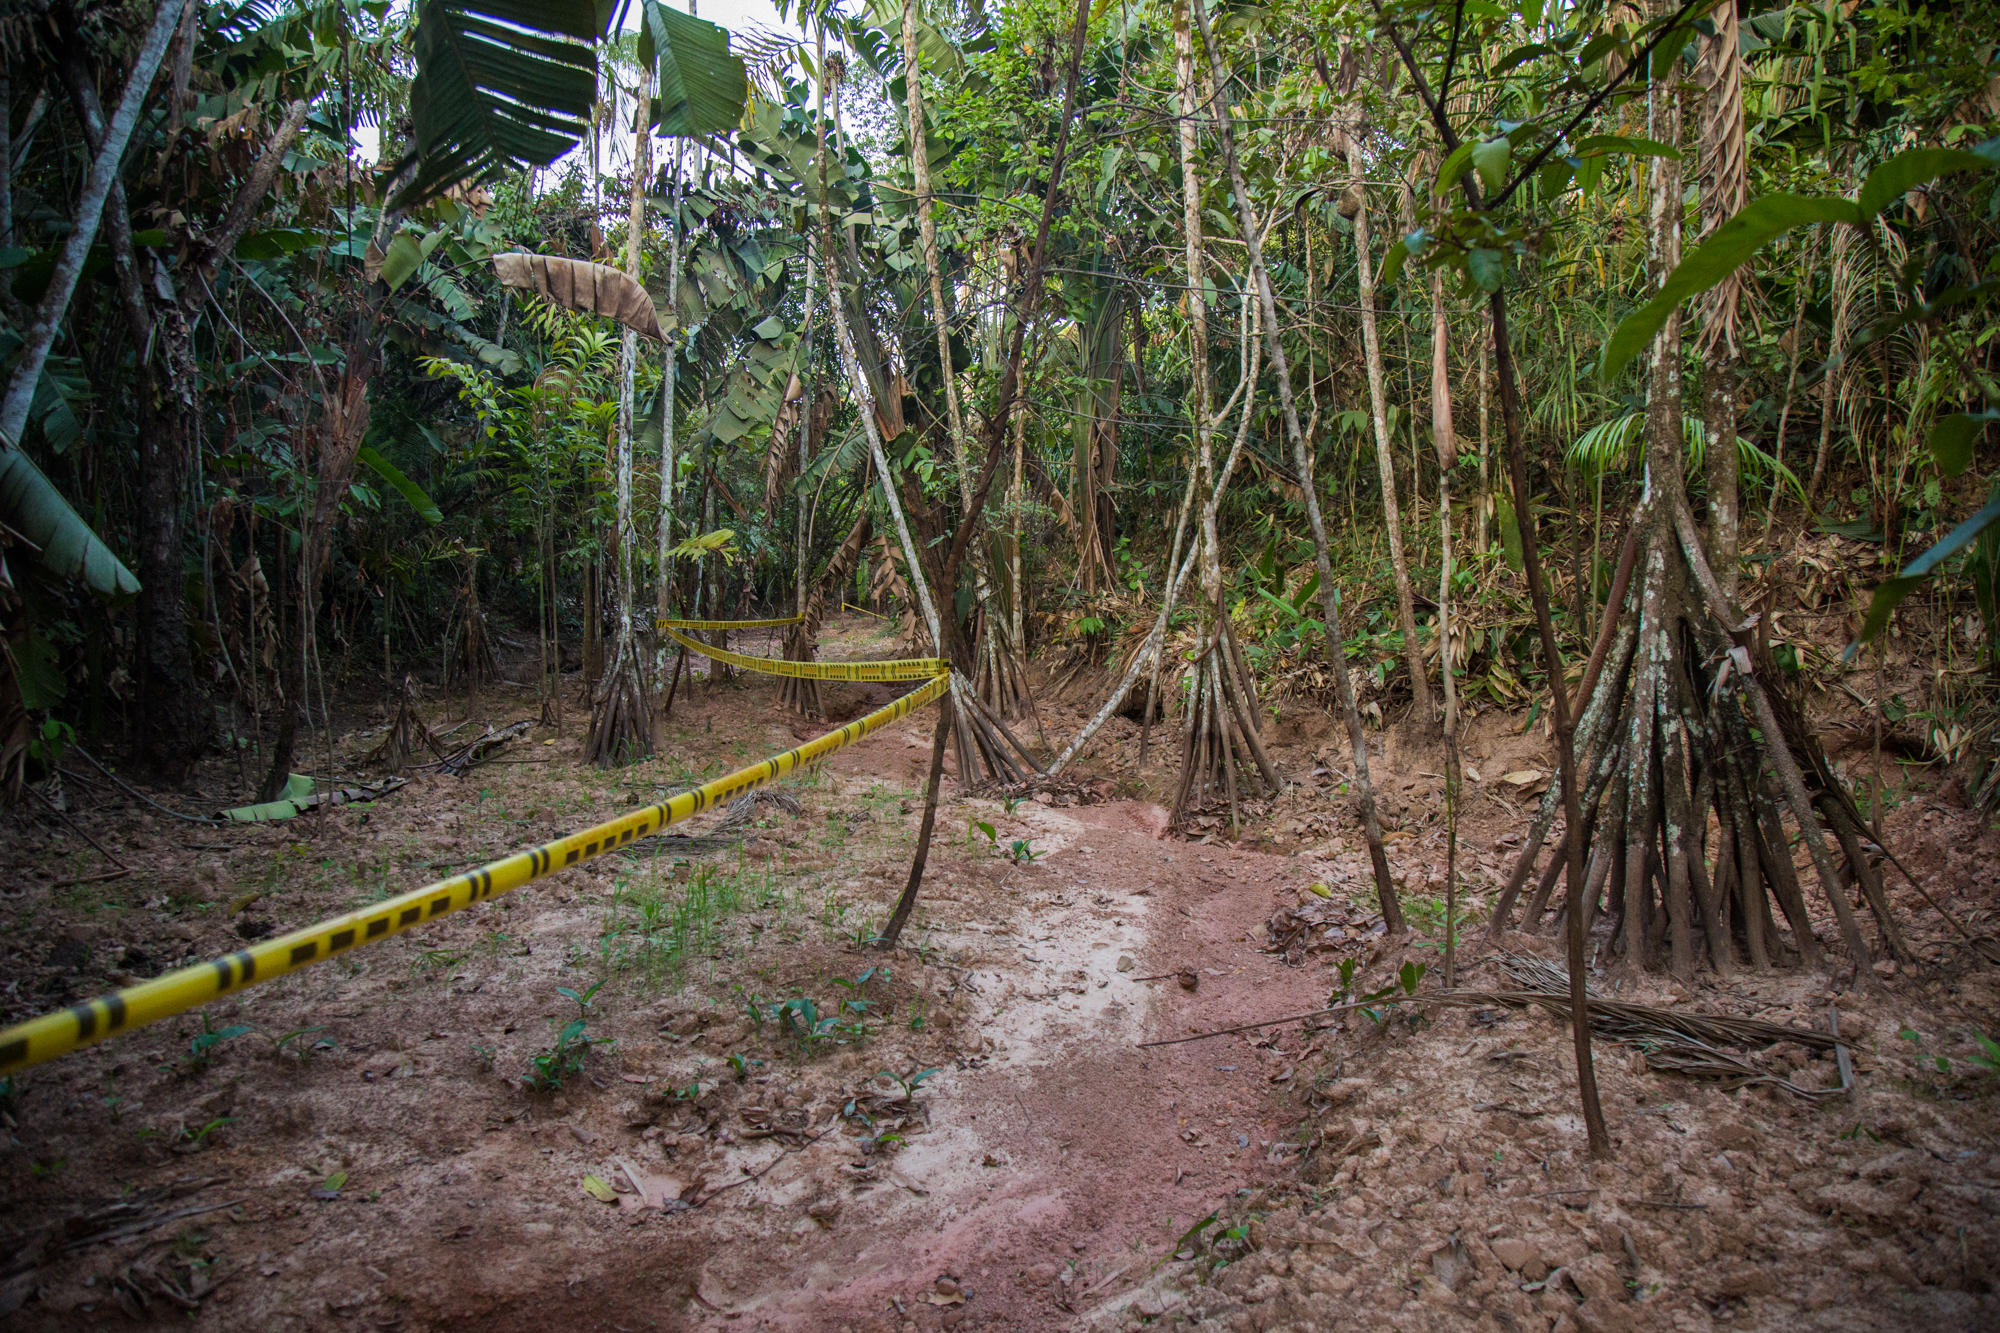  A creek bed caked in oil contamninated mud where an oil spill occured months earlier. Evidence of the spill and subsequent clean up shown by police tape that runs through the dying trees. Rubiales Meta, Colombia. April 9, 2017 